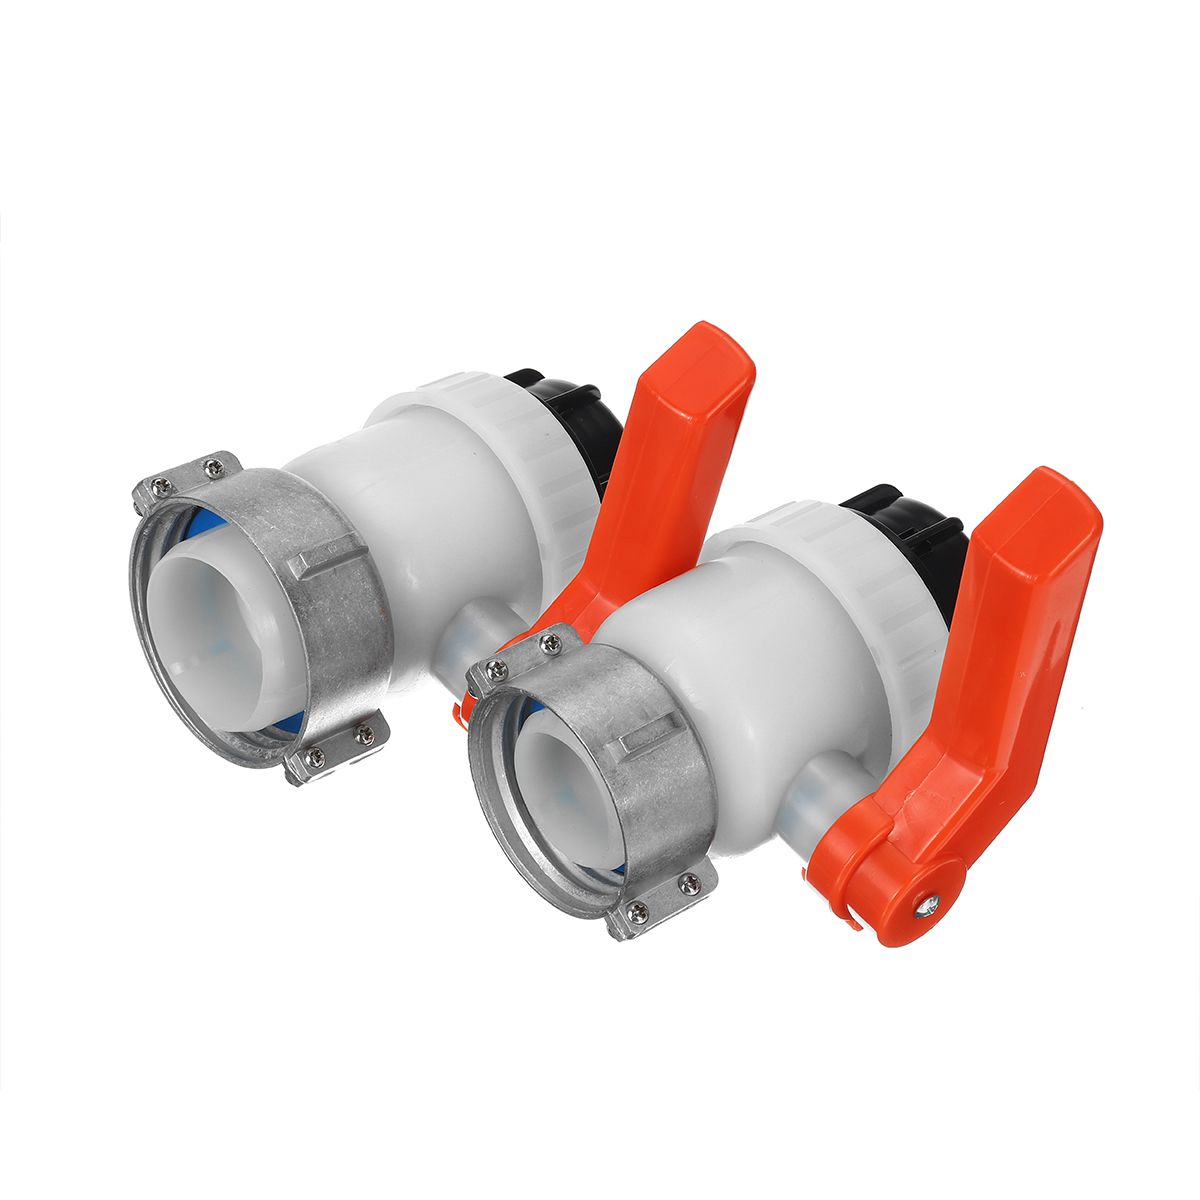 75mm62mm-Replacement-IBC-Tank-Butterfly-Valve-Tap-Water-Container-Mauser-Connector-Fittings-1694245